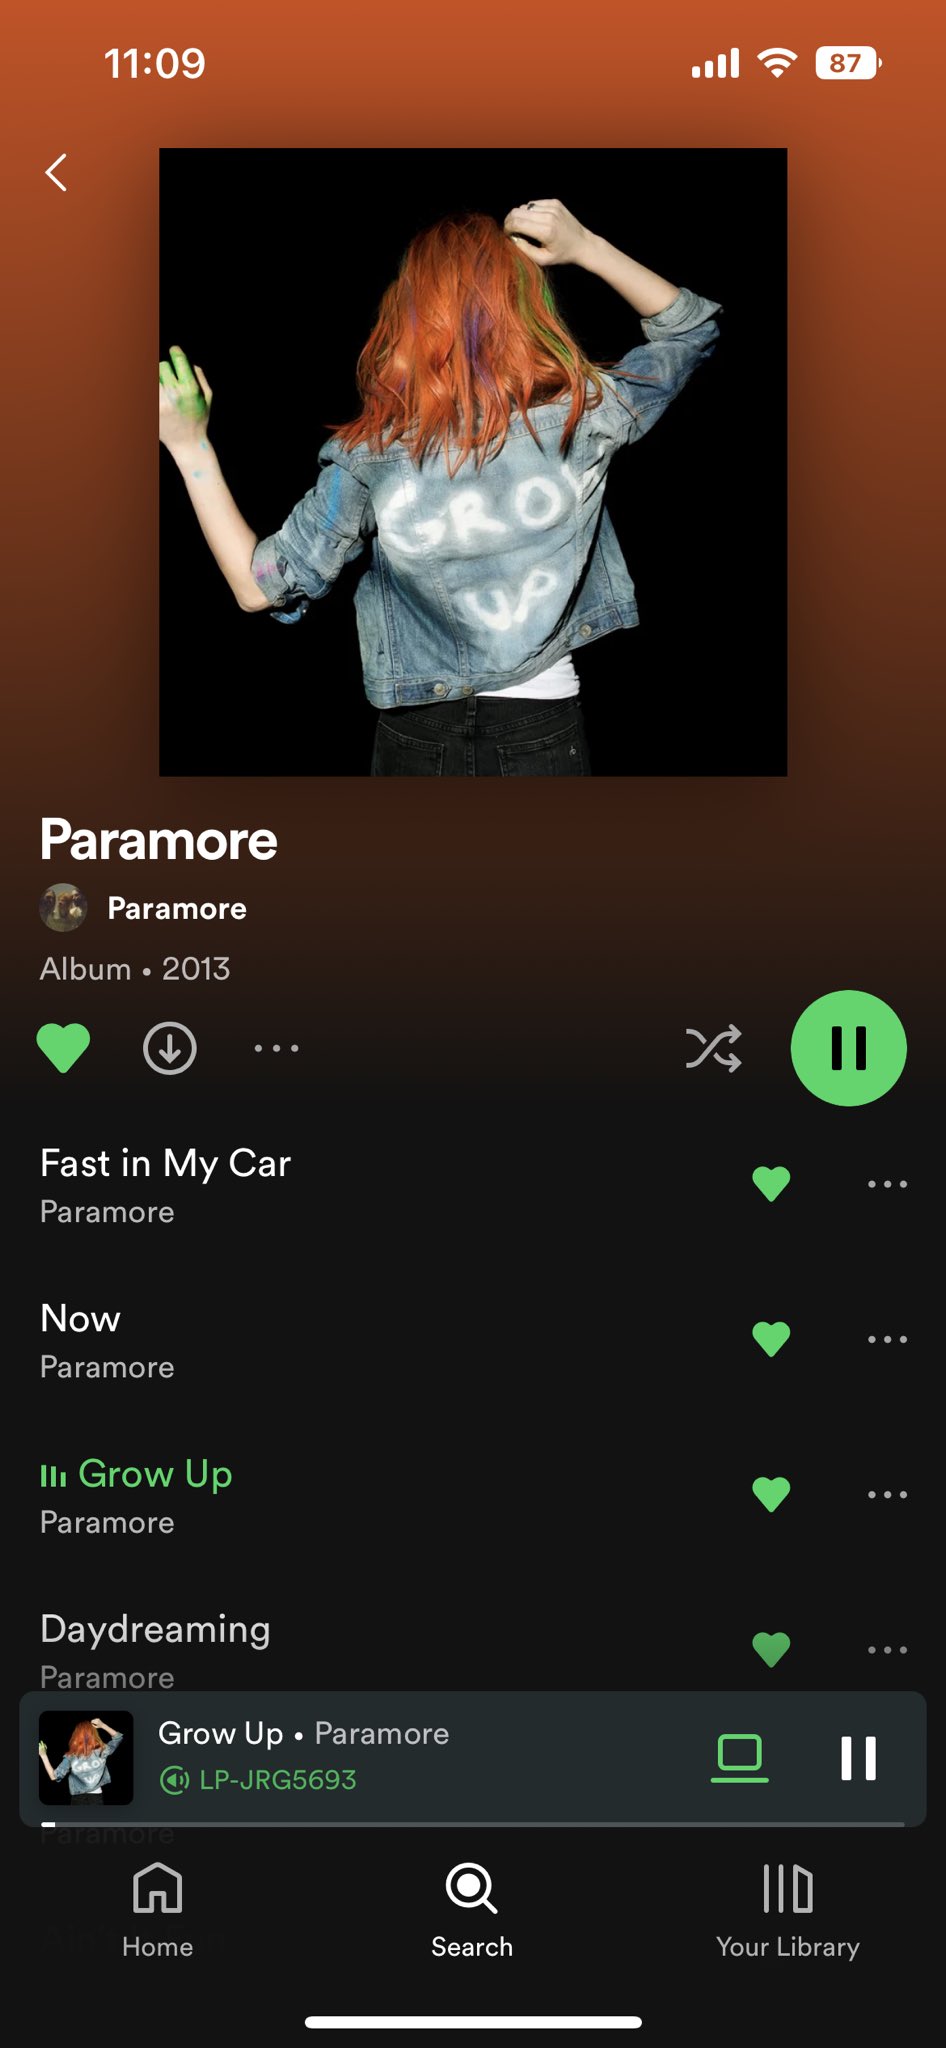 Paramore-Music.com on X: The self-titled album artwork on Spotify